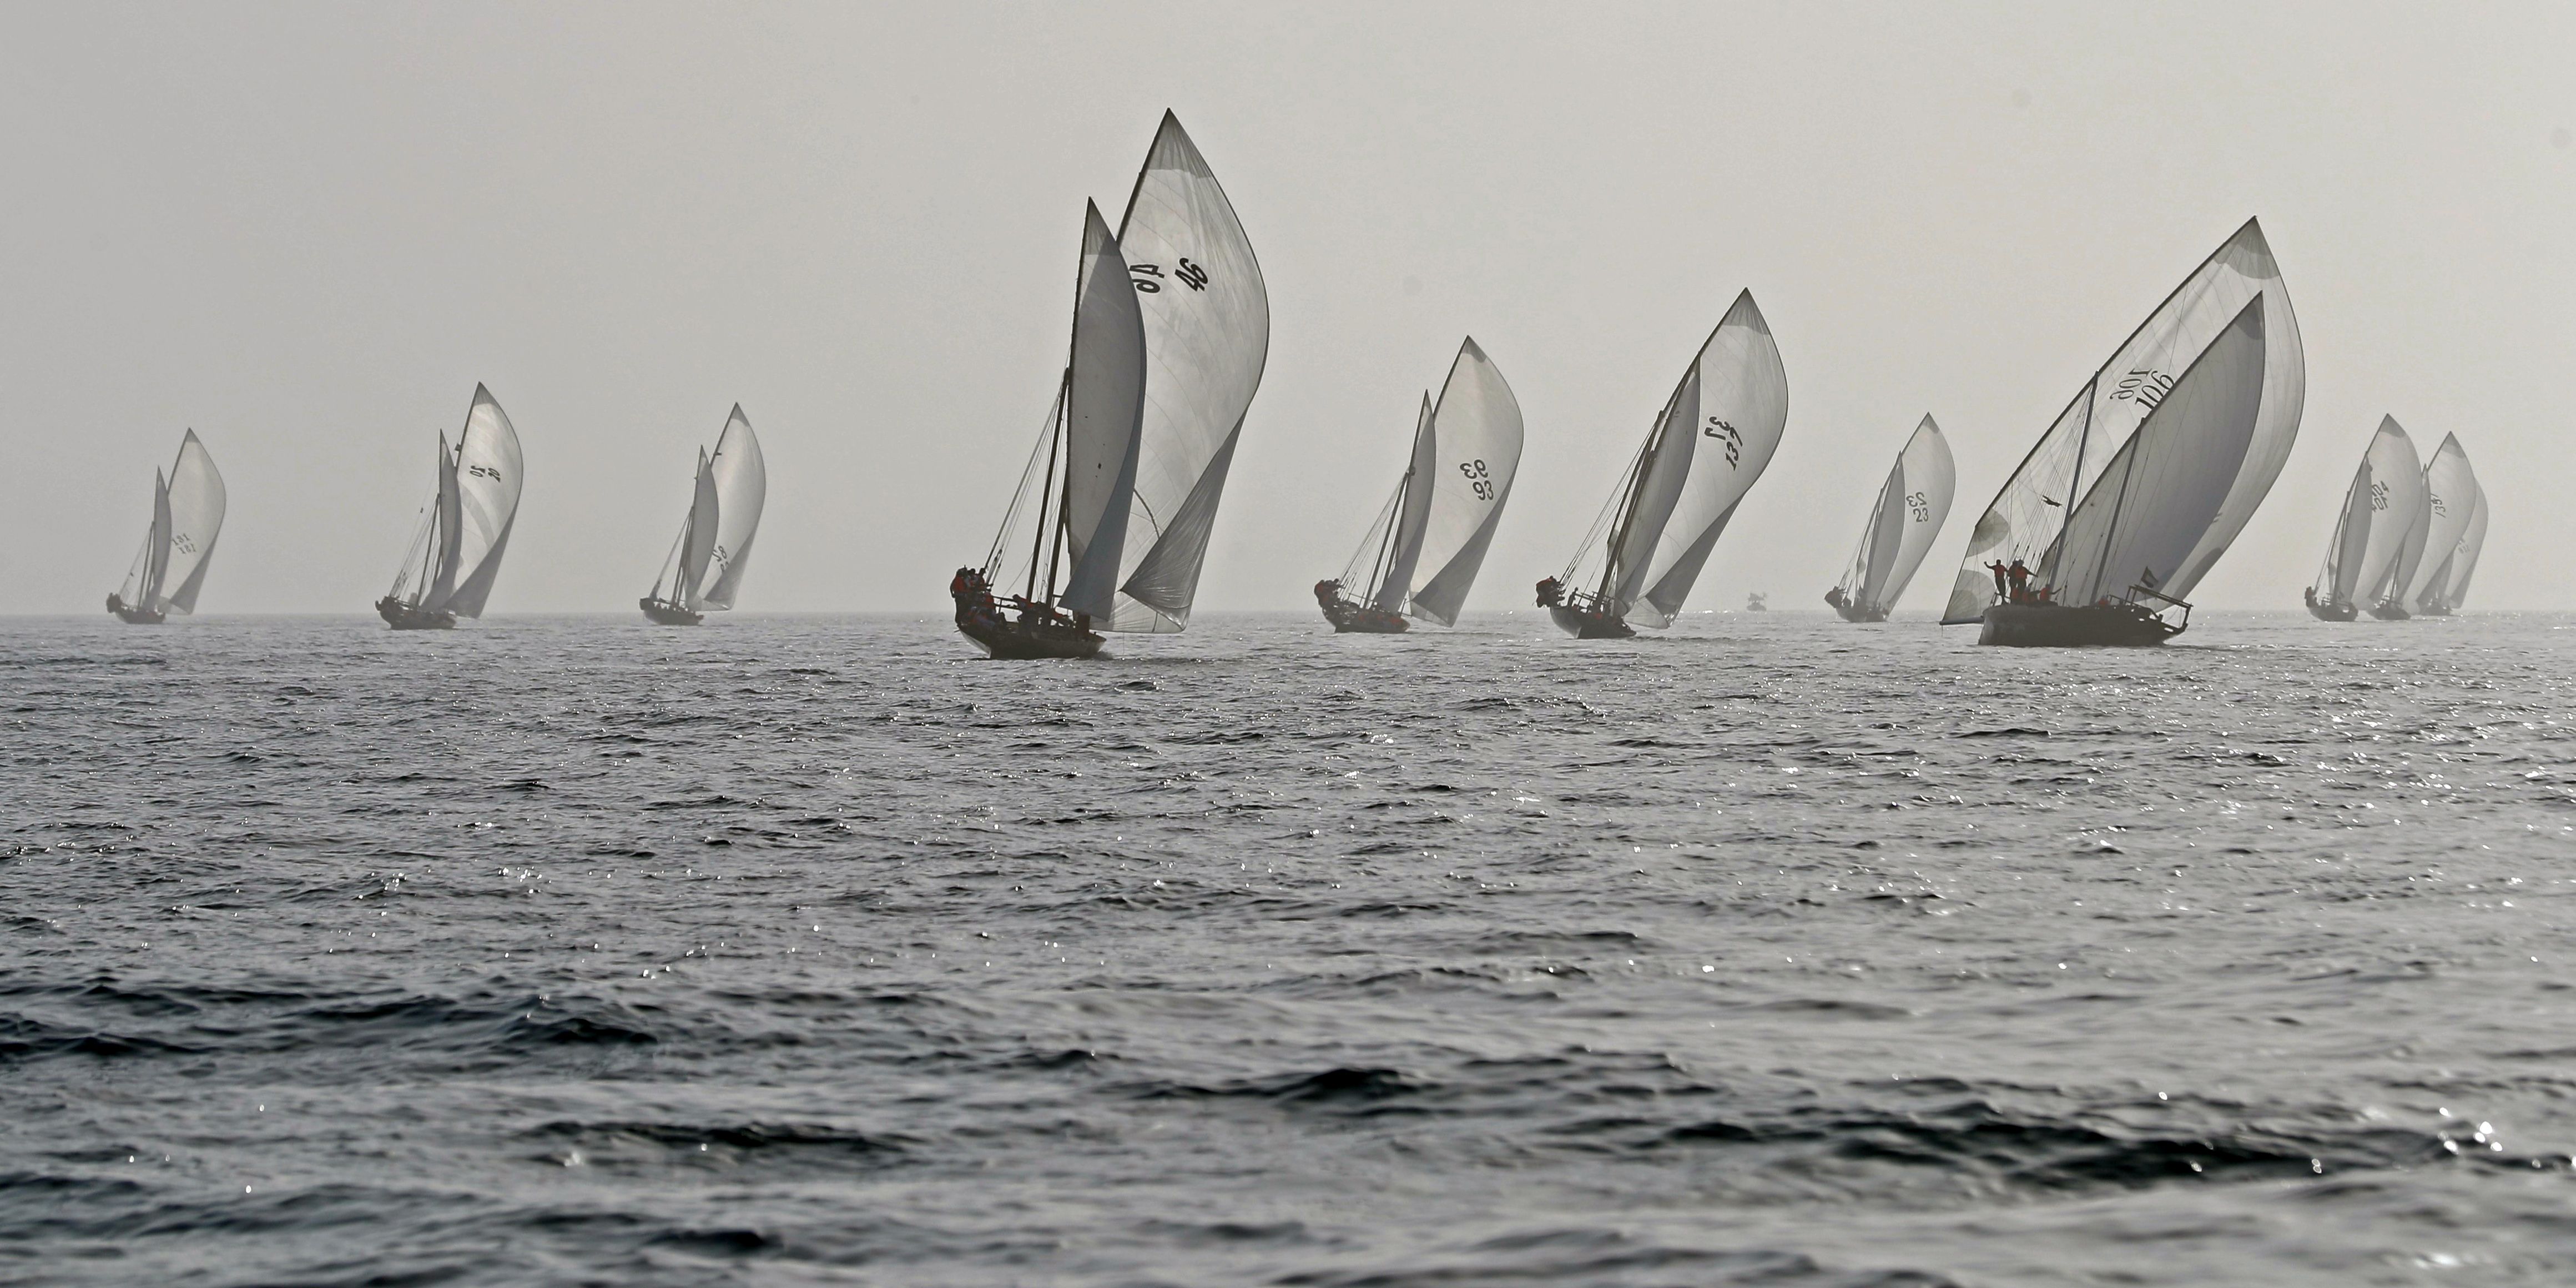 Fleet Carrying the Organizing Commitee heading for 29th Al Gaffal Race